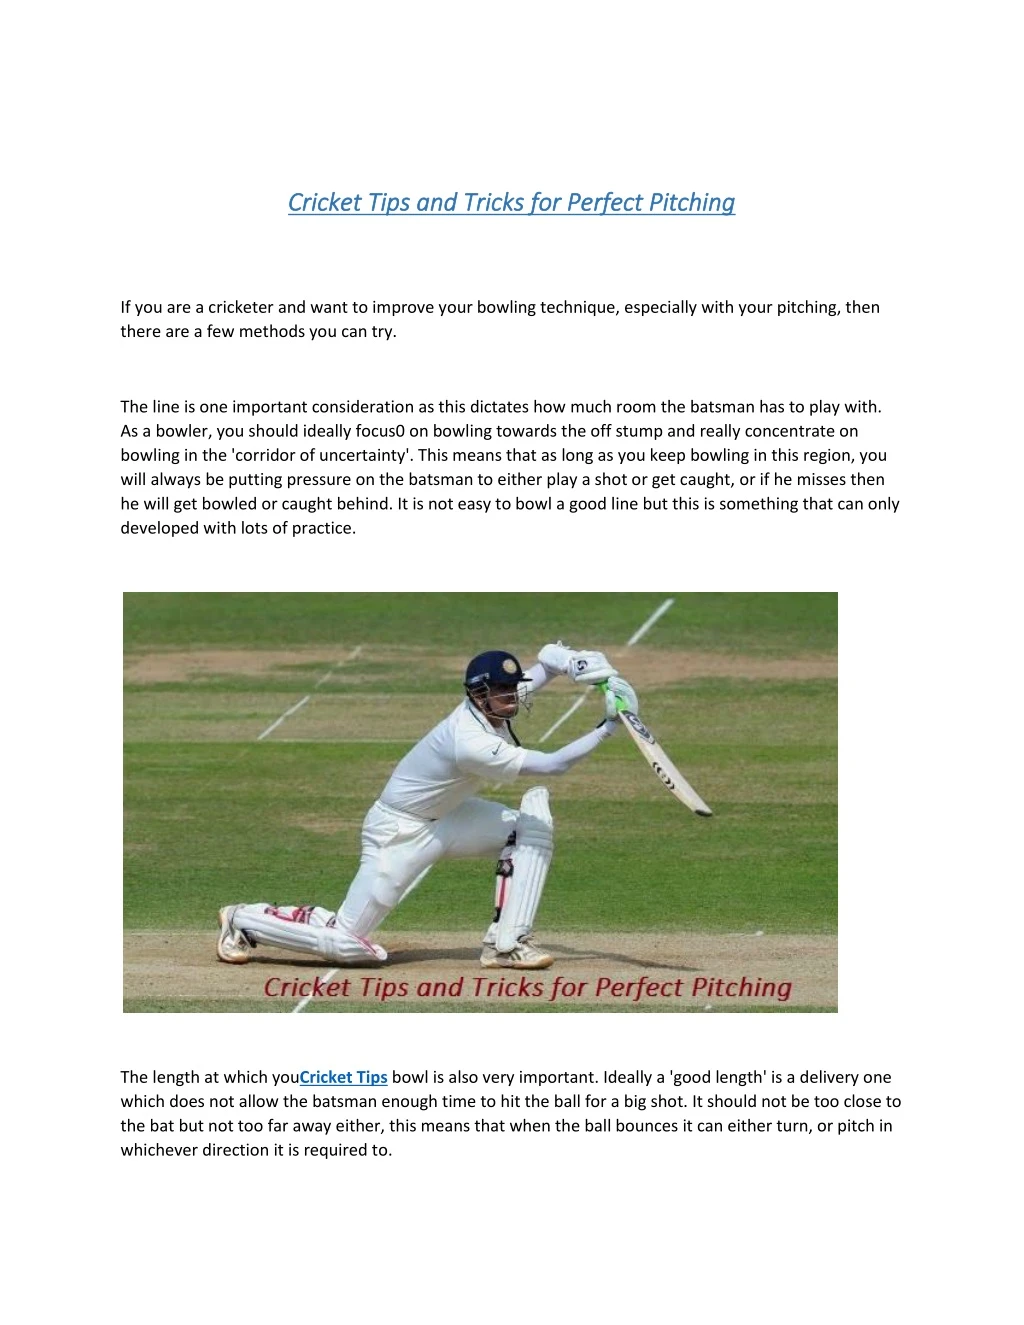 cricket tips and tricks for perfect pitching